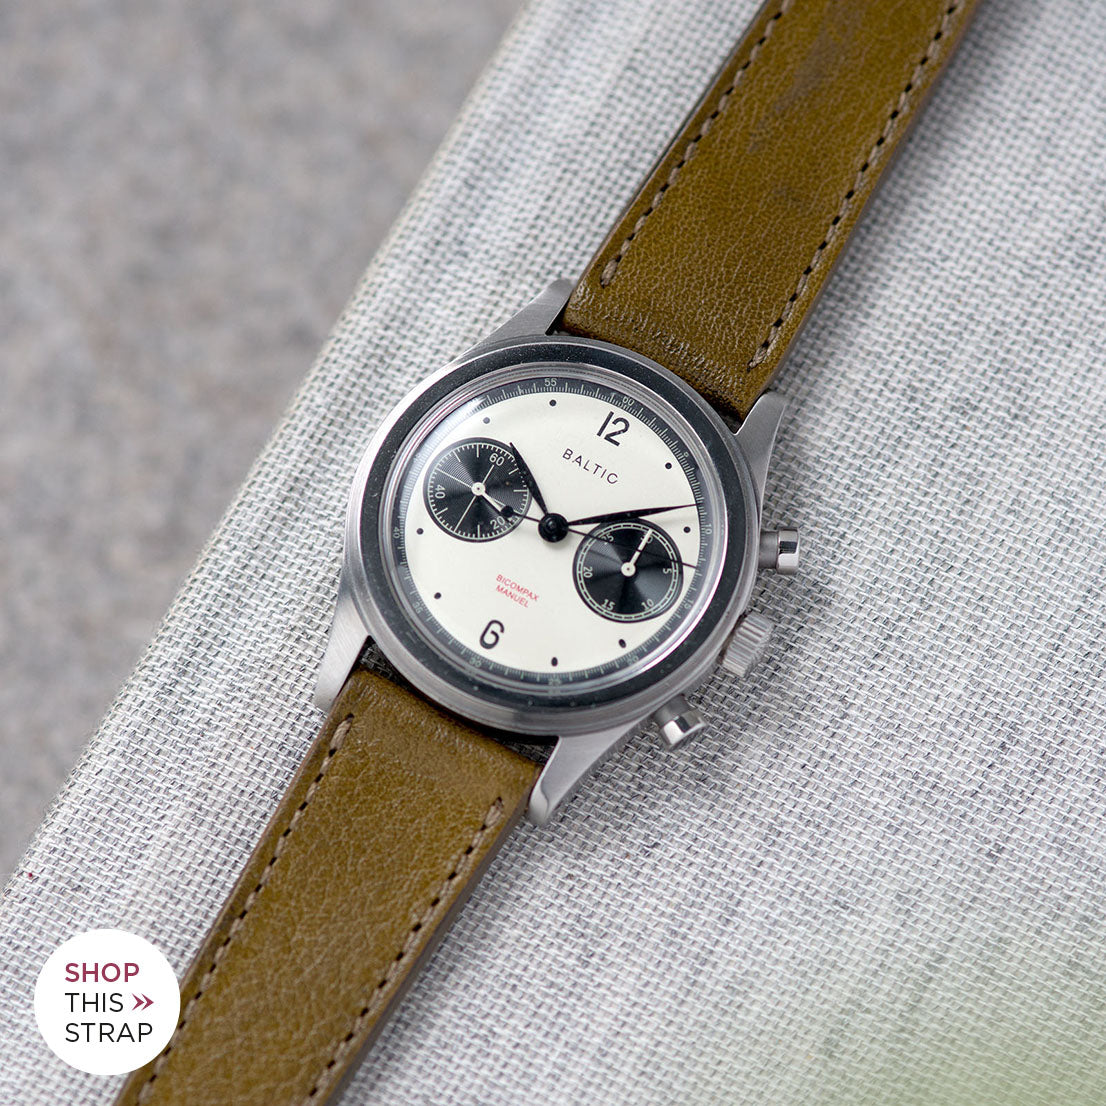 Bulang and Sons_Strap Guide_The Baltic-Chronograph-Panda-Limited-Edition_Light Olive Green Leather Watch Strap